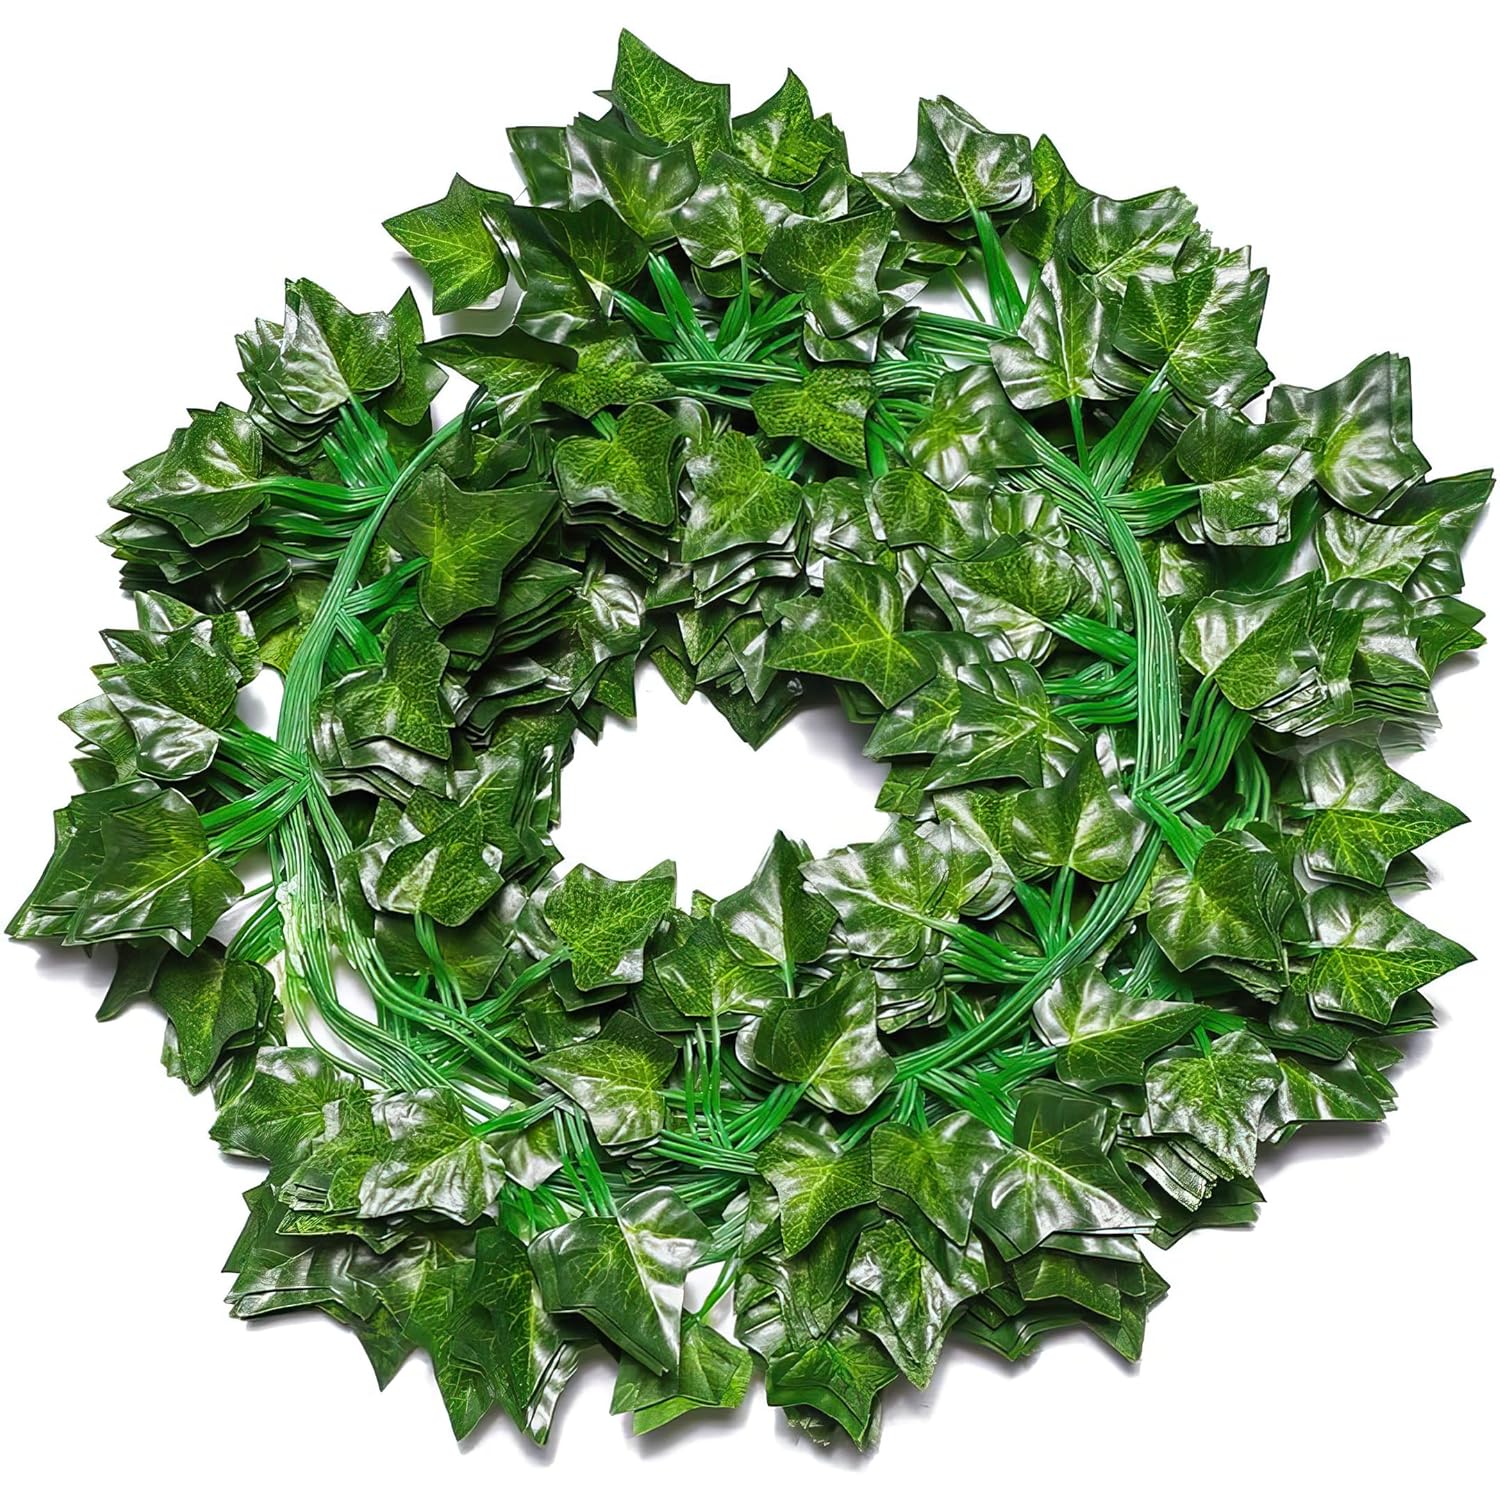 Artificial Green Leaves Vines for Decoration Wall - 6 Pieces